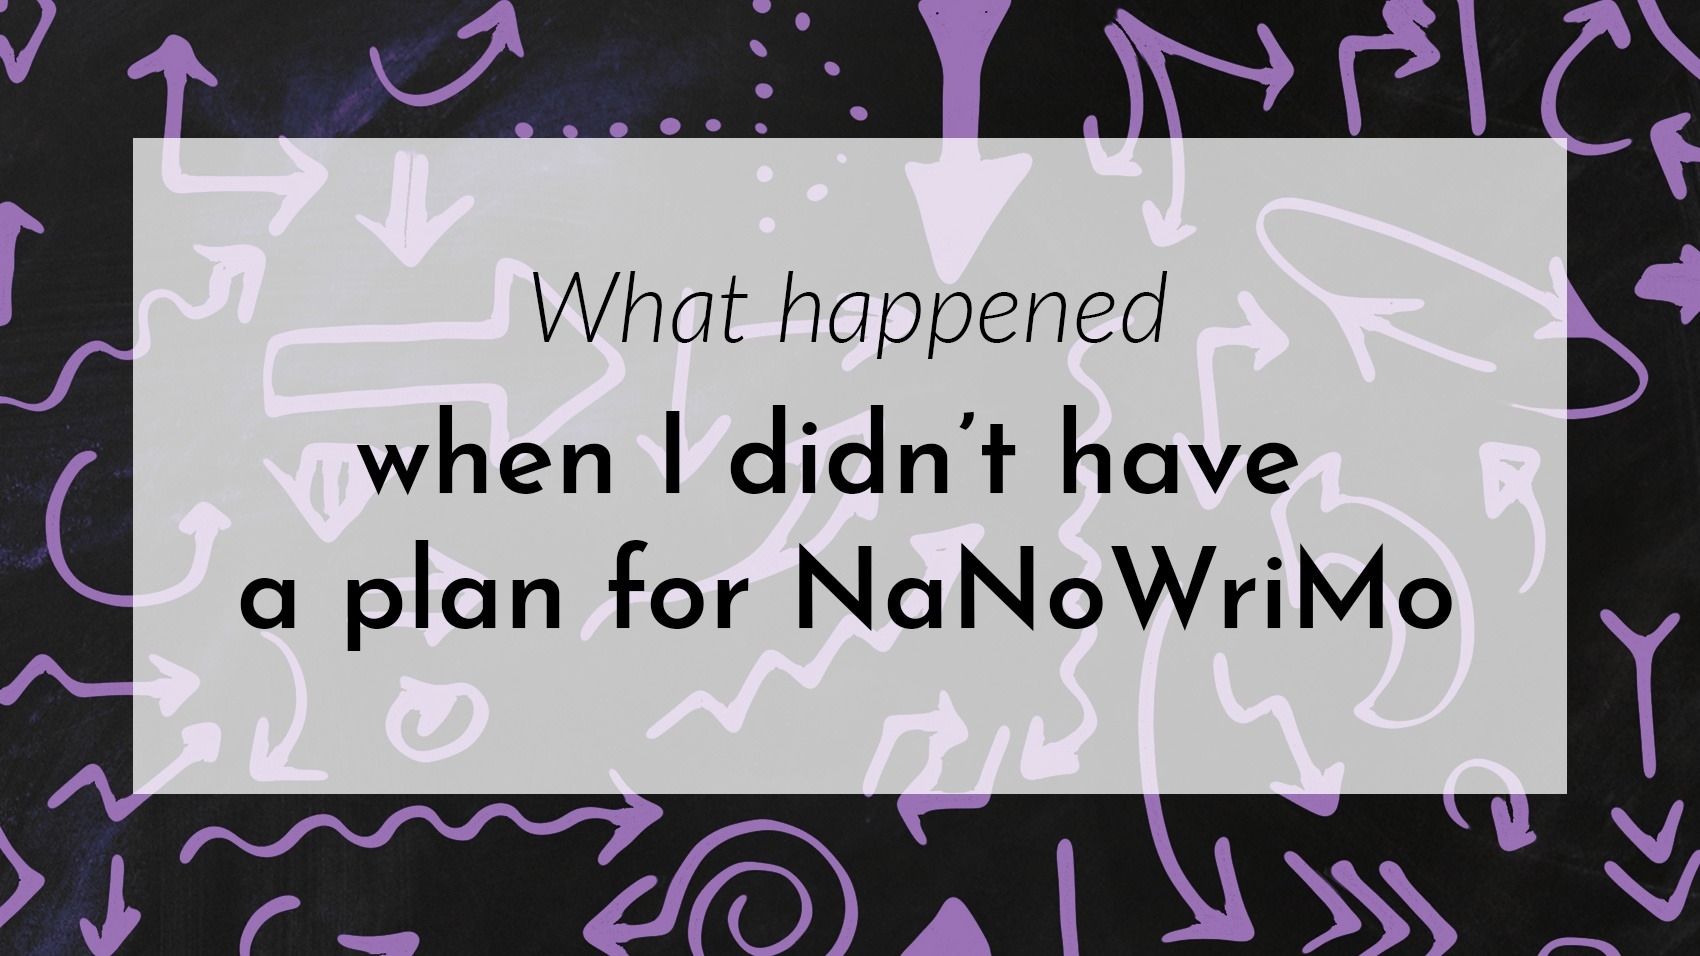 Banner: What happened when I didn't have a plan for NaNoWriMo